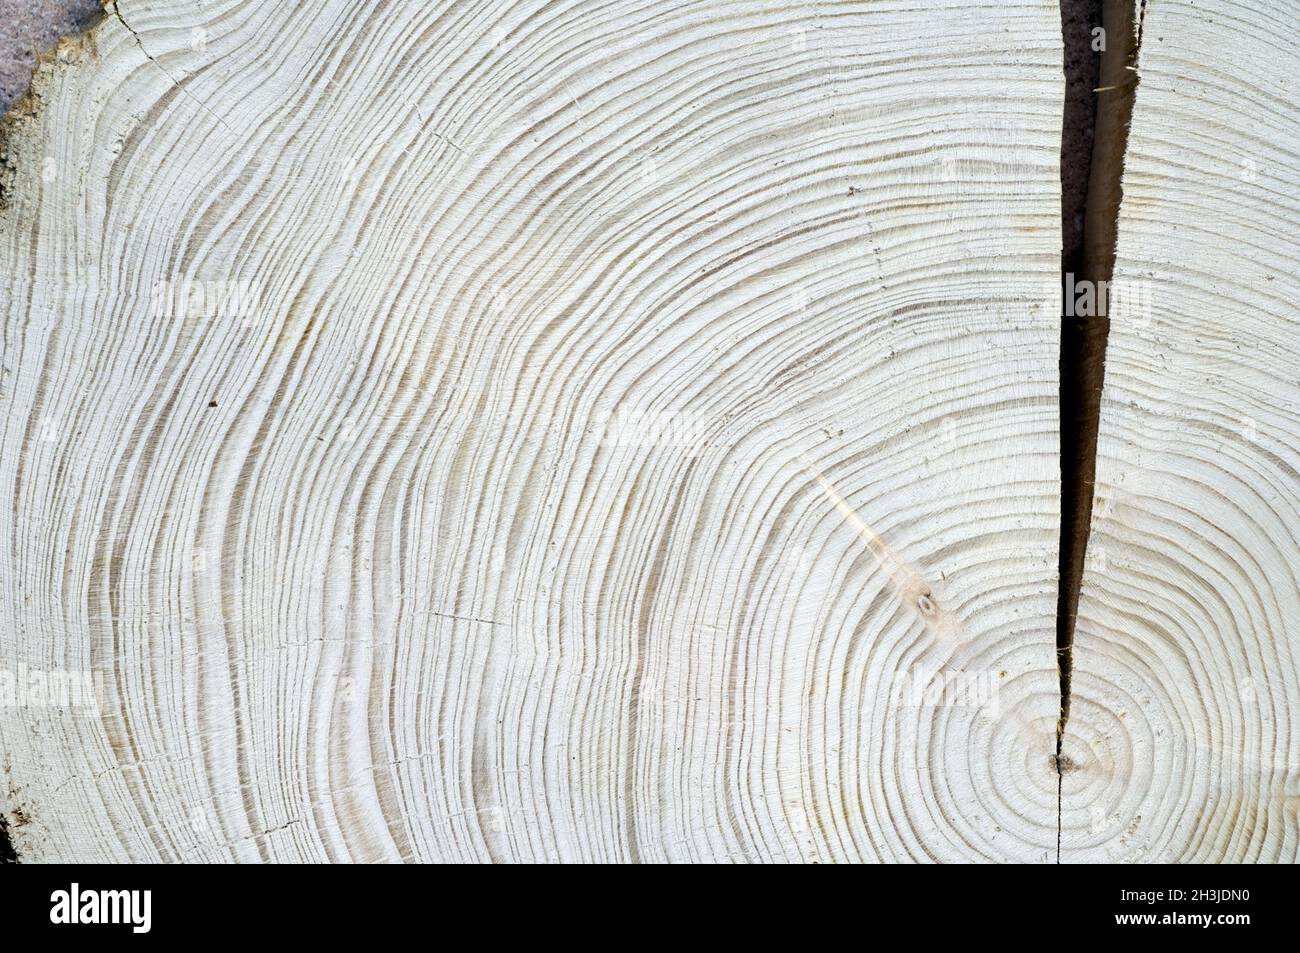 Annual rings; spruce; picea; abies; Norway spruce; annual ring; ring of wood; Stock Photo